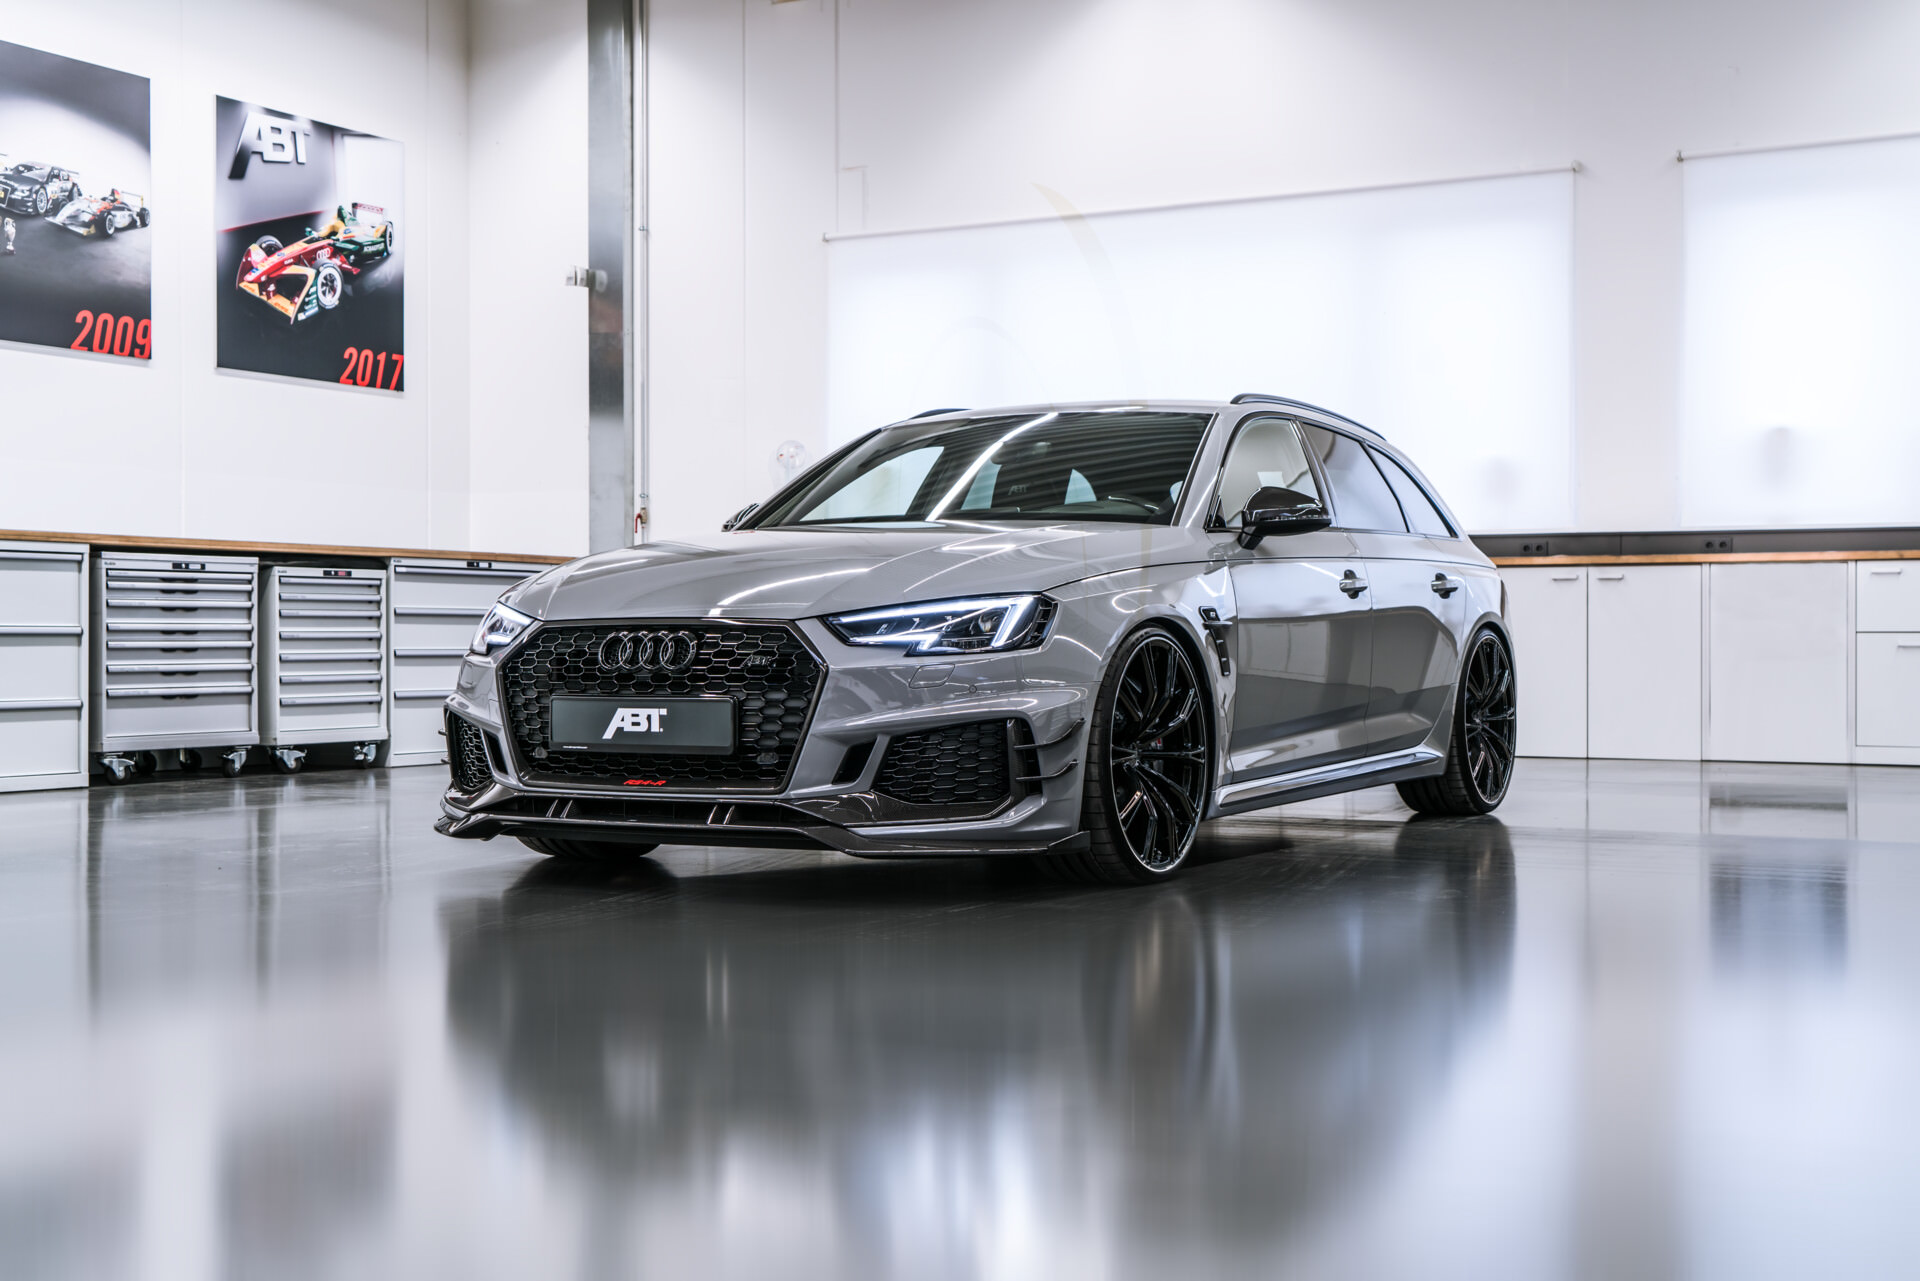 https://www.pitlanetuning.com/wp-content/uploads/2020/02/ABT-RS4-R-Grey-Front4.jpg